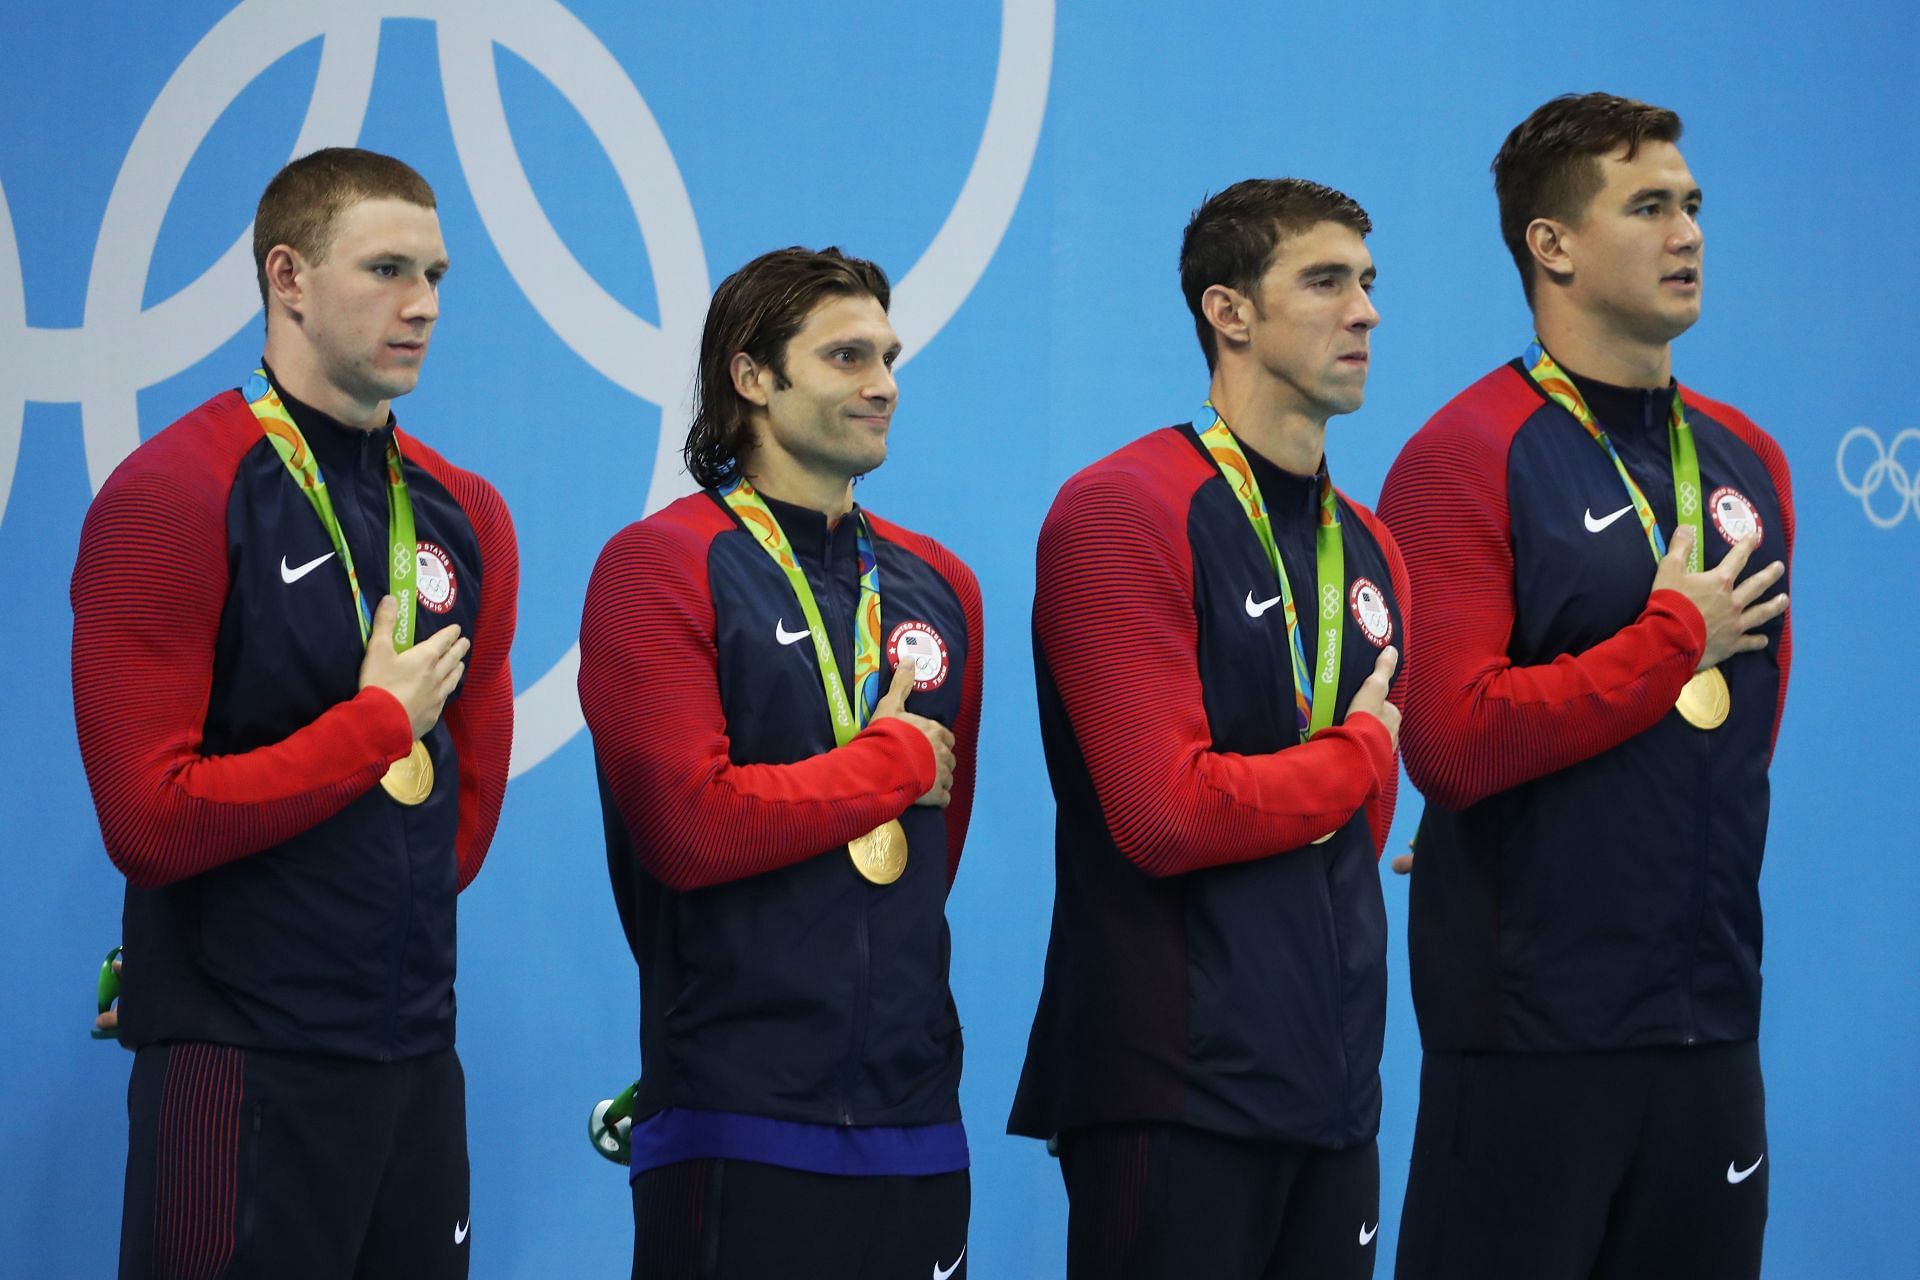 Team USA and Michael Phelps at the 2016 Rio Olympics